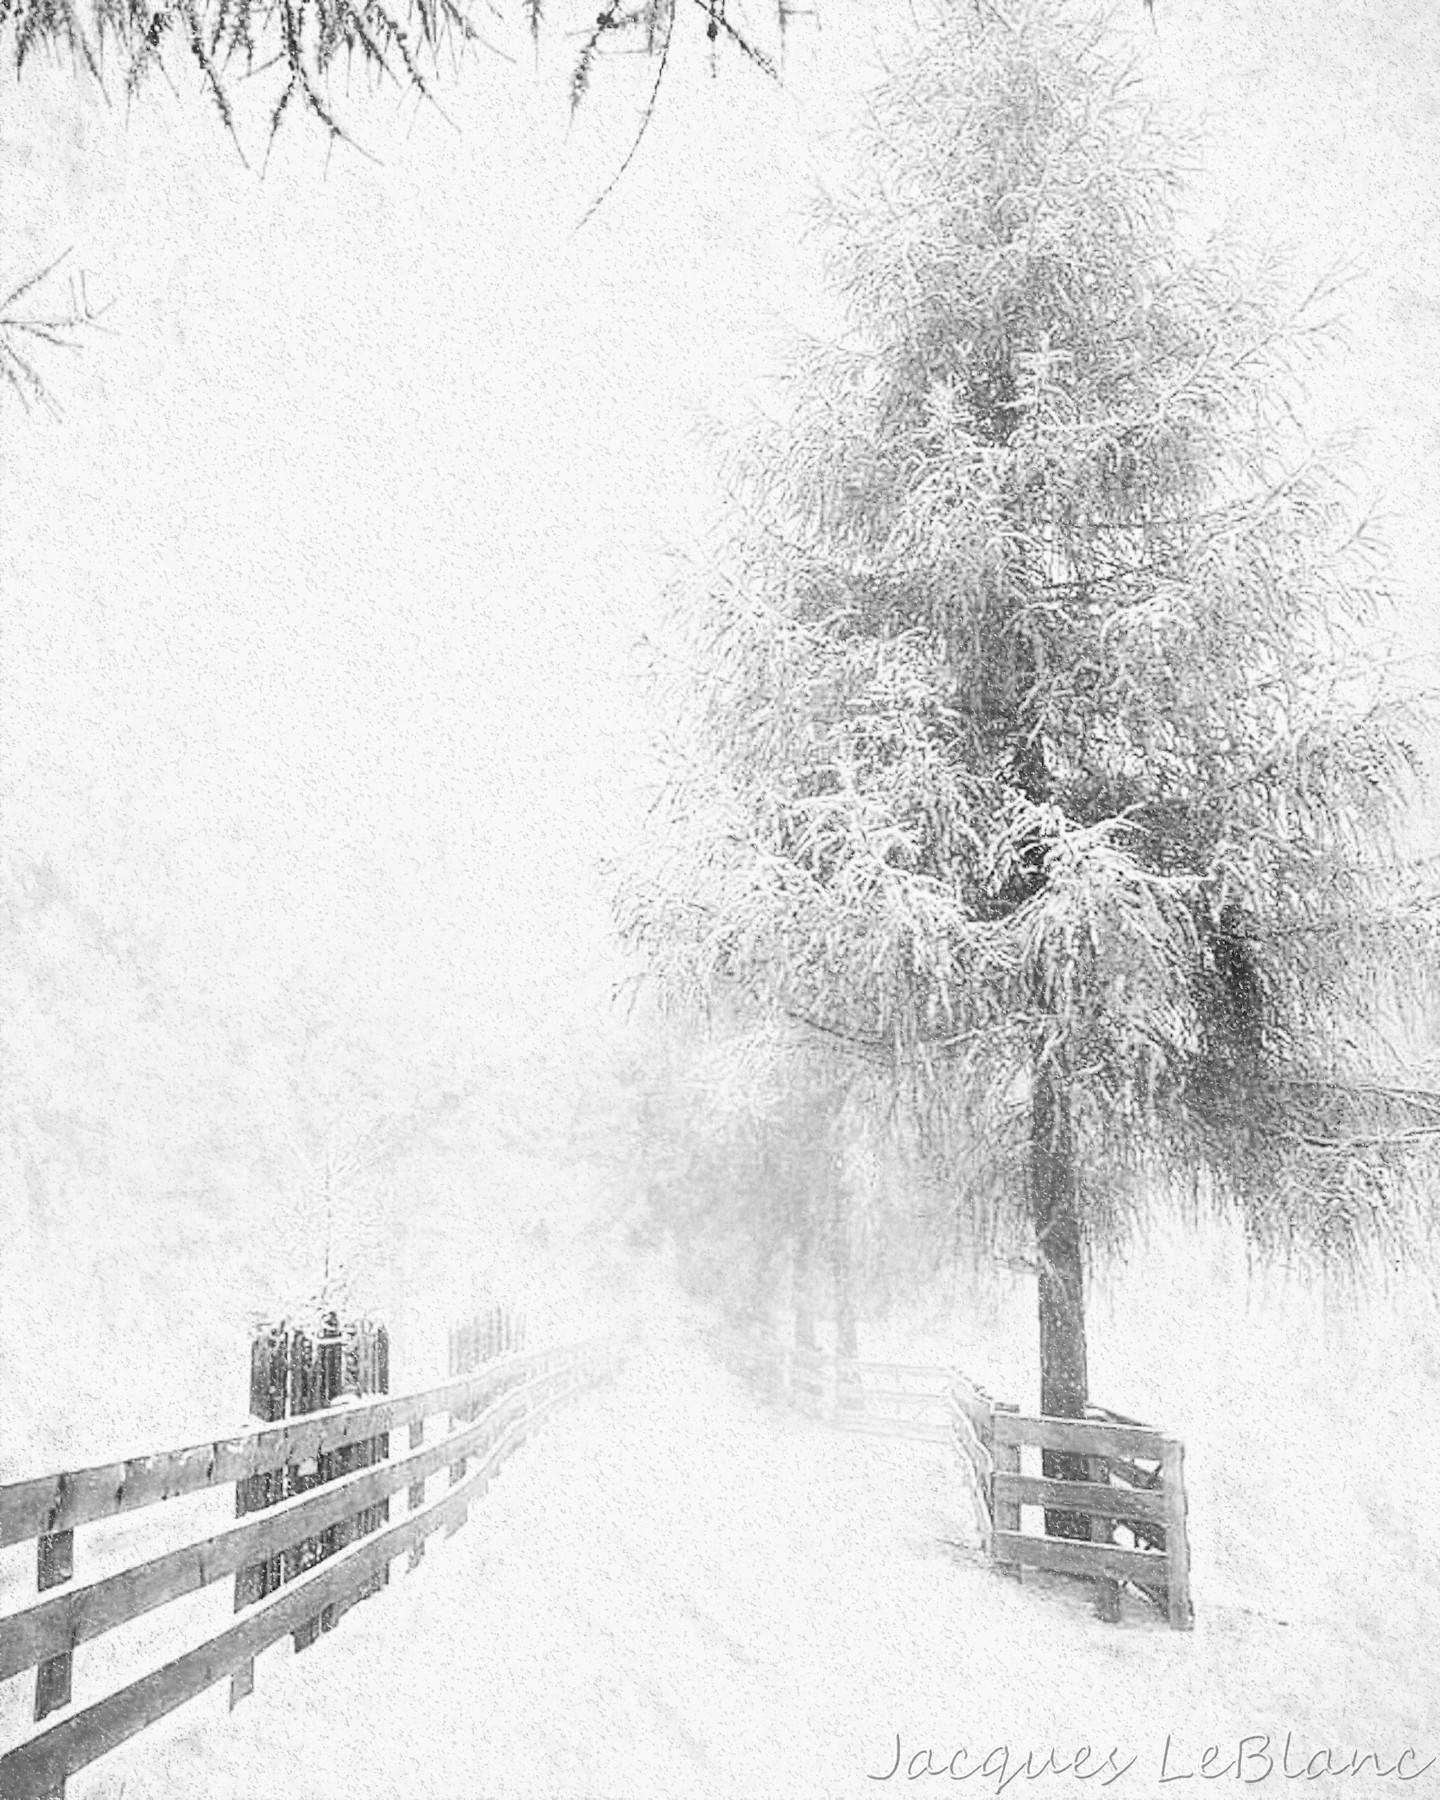 Taking a walk during a snowstorm and listening to the sounds of silence. A horse farm on the North Fork of Long Island.